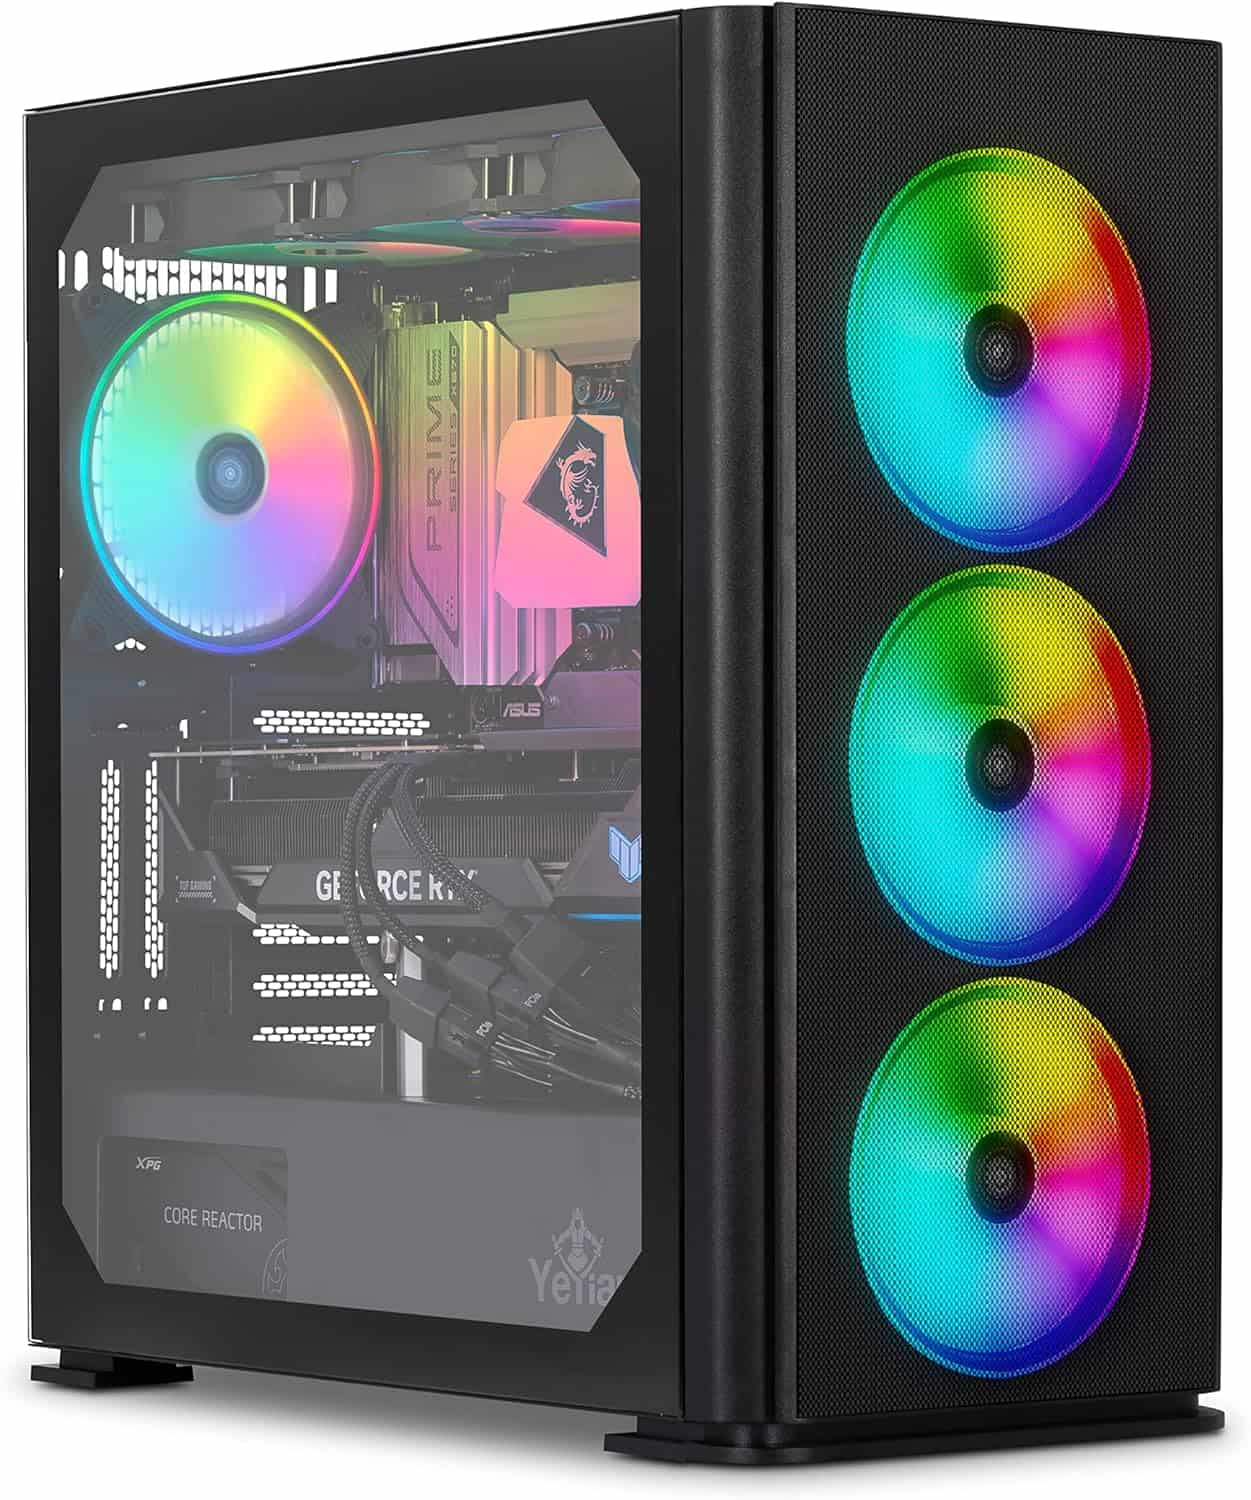 Best RTX 4090 gaming PC - A YEYIAN ODACHI gaming PC with a transparent side panel and multicolored RGB fans.